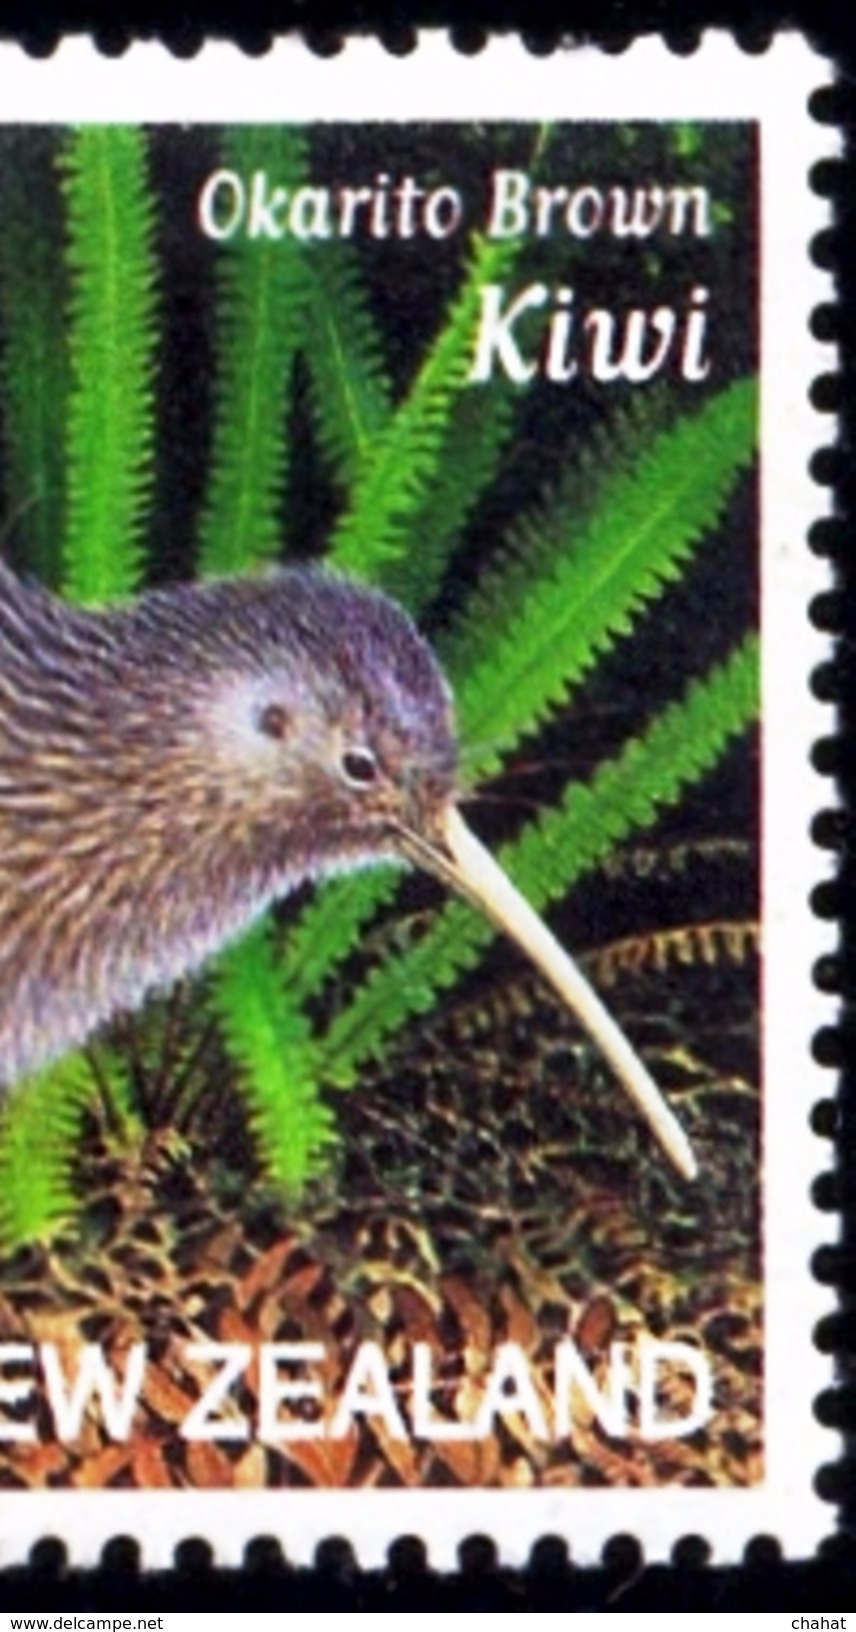 FLIGHTLESS BIRDS-KIWI-COLOR SEPARATION-ERROR-TRIALS-SET OF 5-JOINT ISSUE WITH FRANCE-NEW ZEALAND-2000-SG-2375-MNH-PA-06 - Kiwi